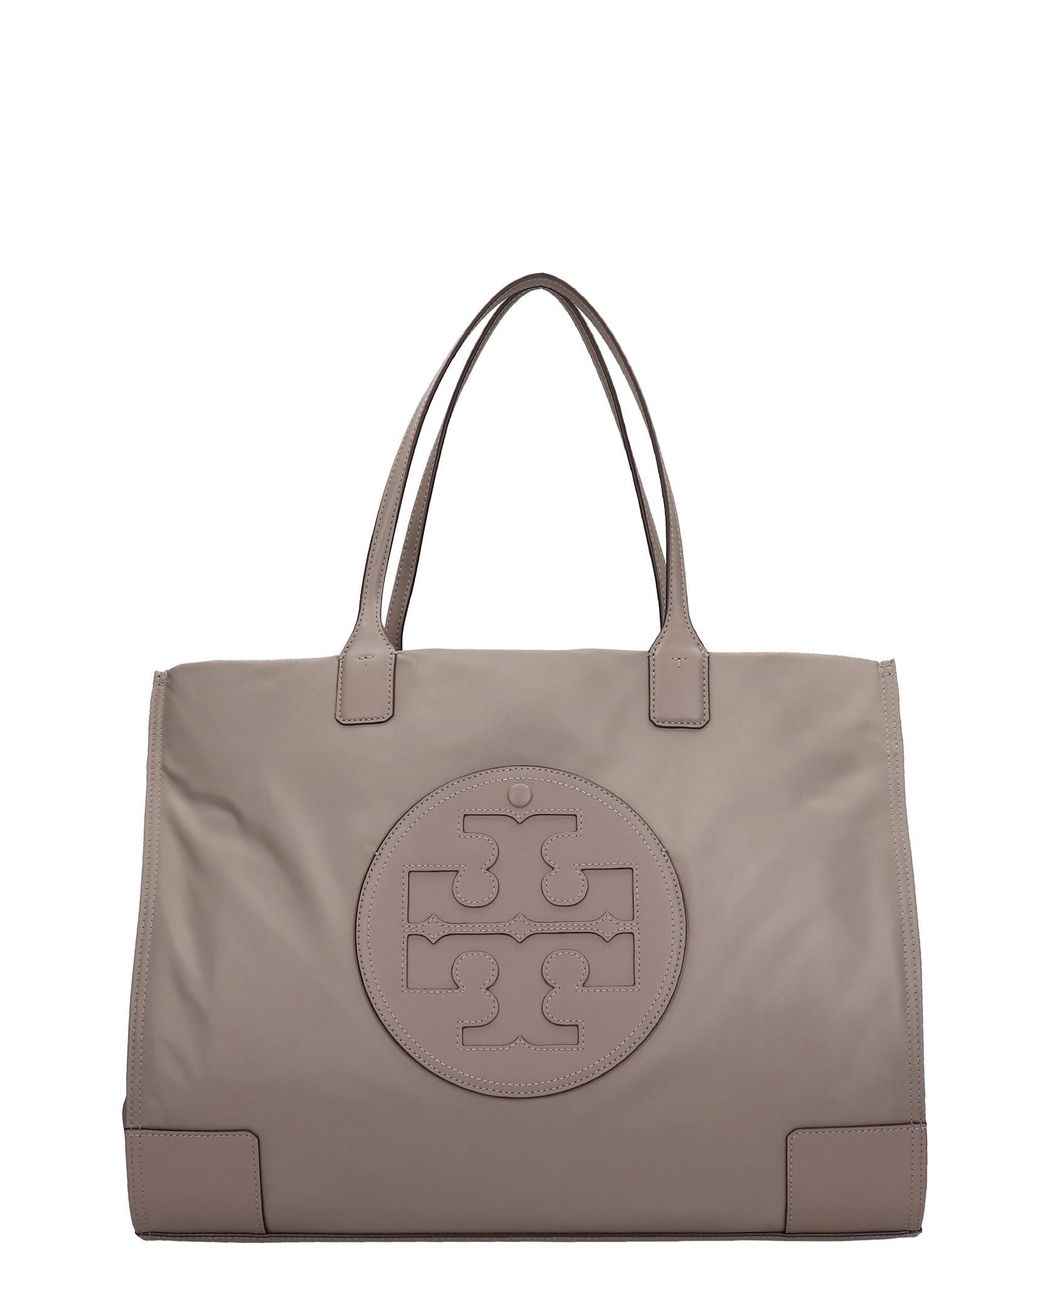 Tory Burch Ella Tote In Taupe Leather in Grey | Lyst UK